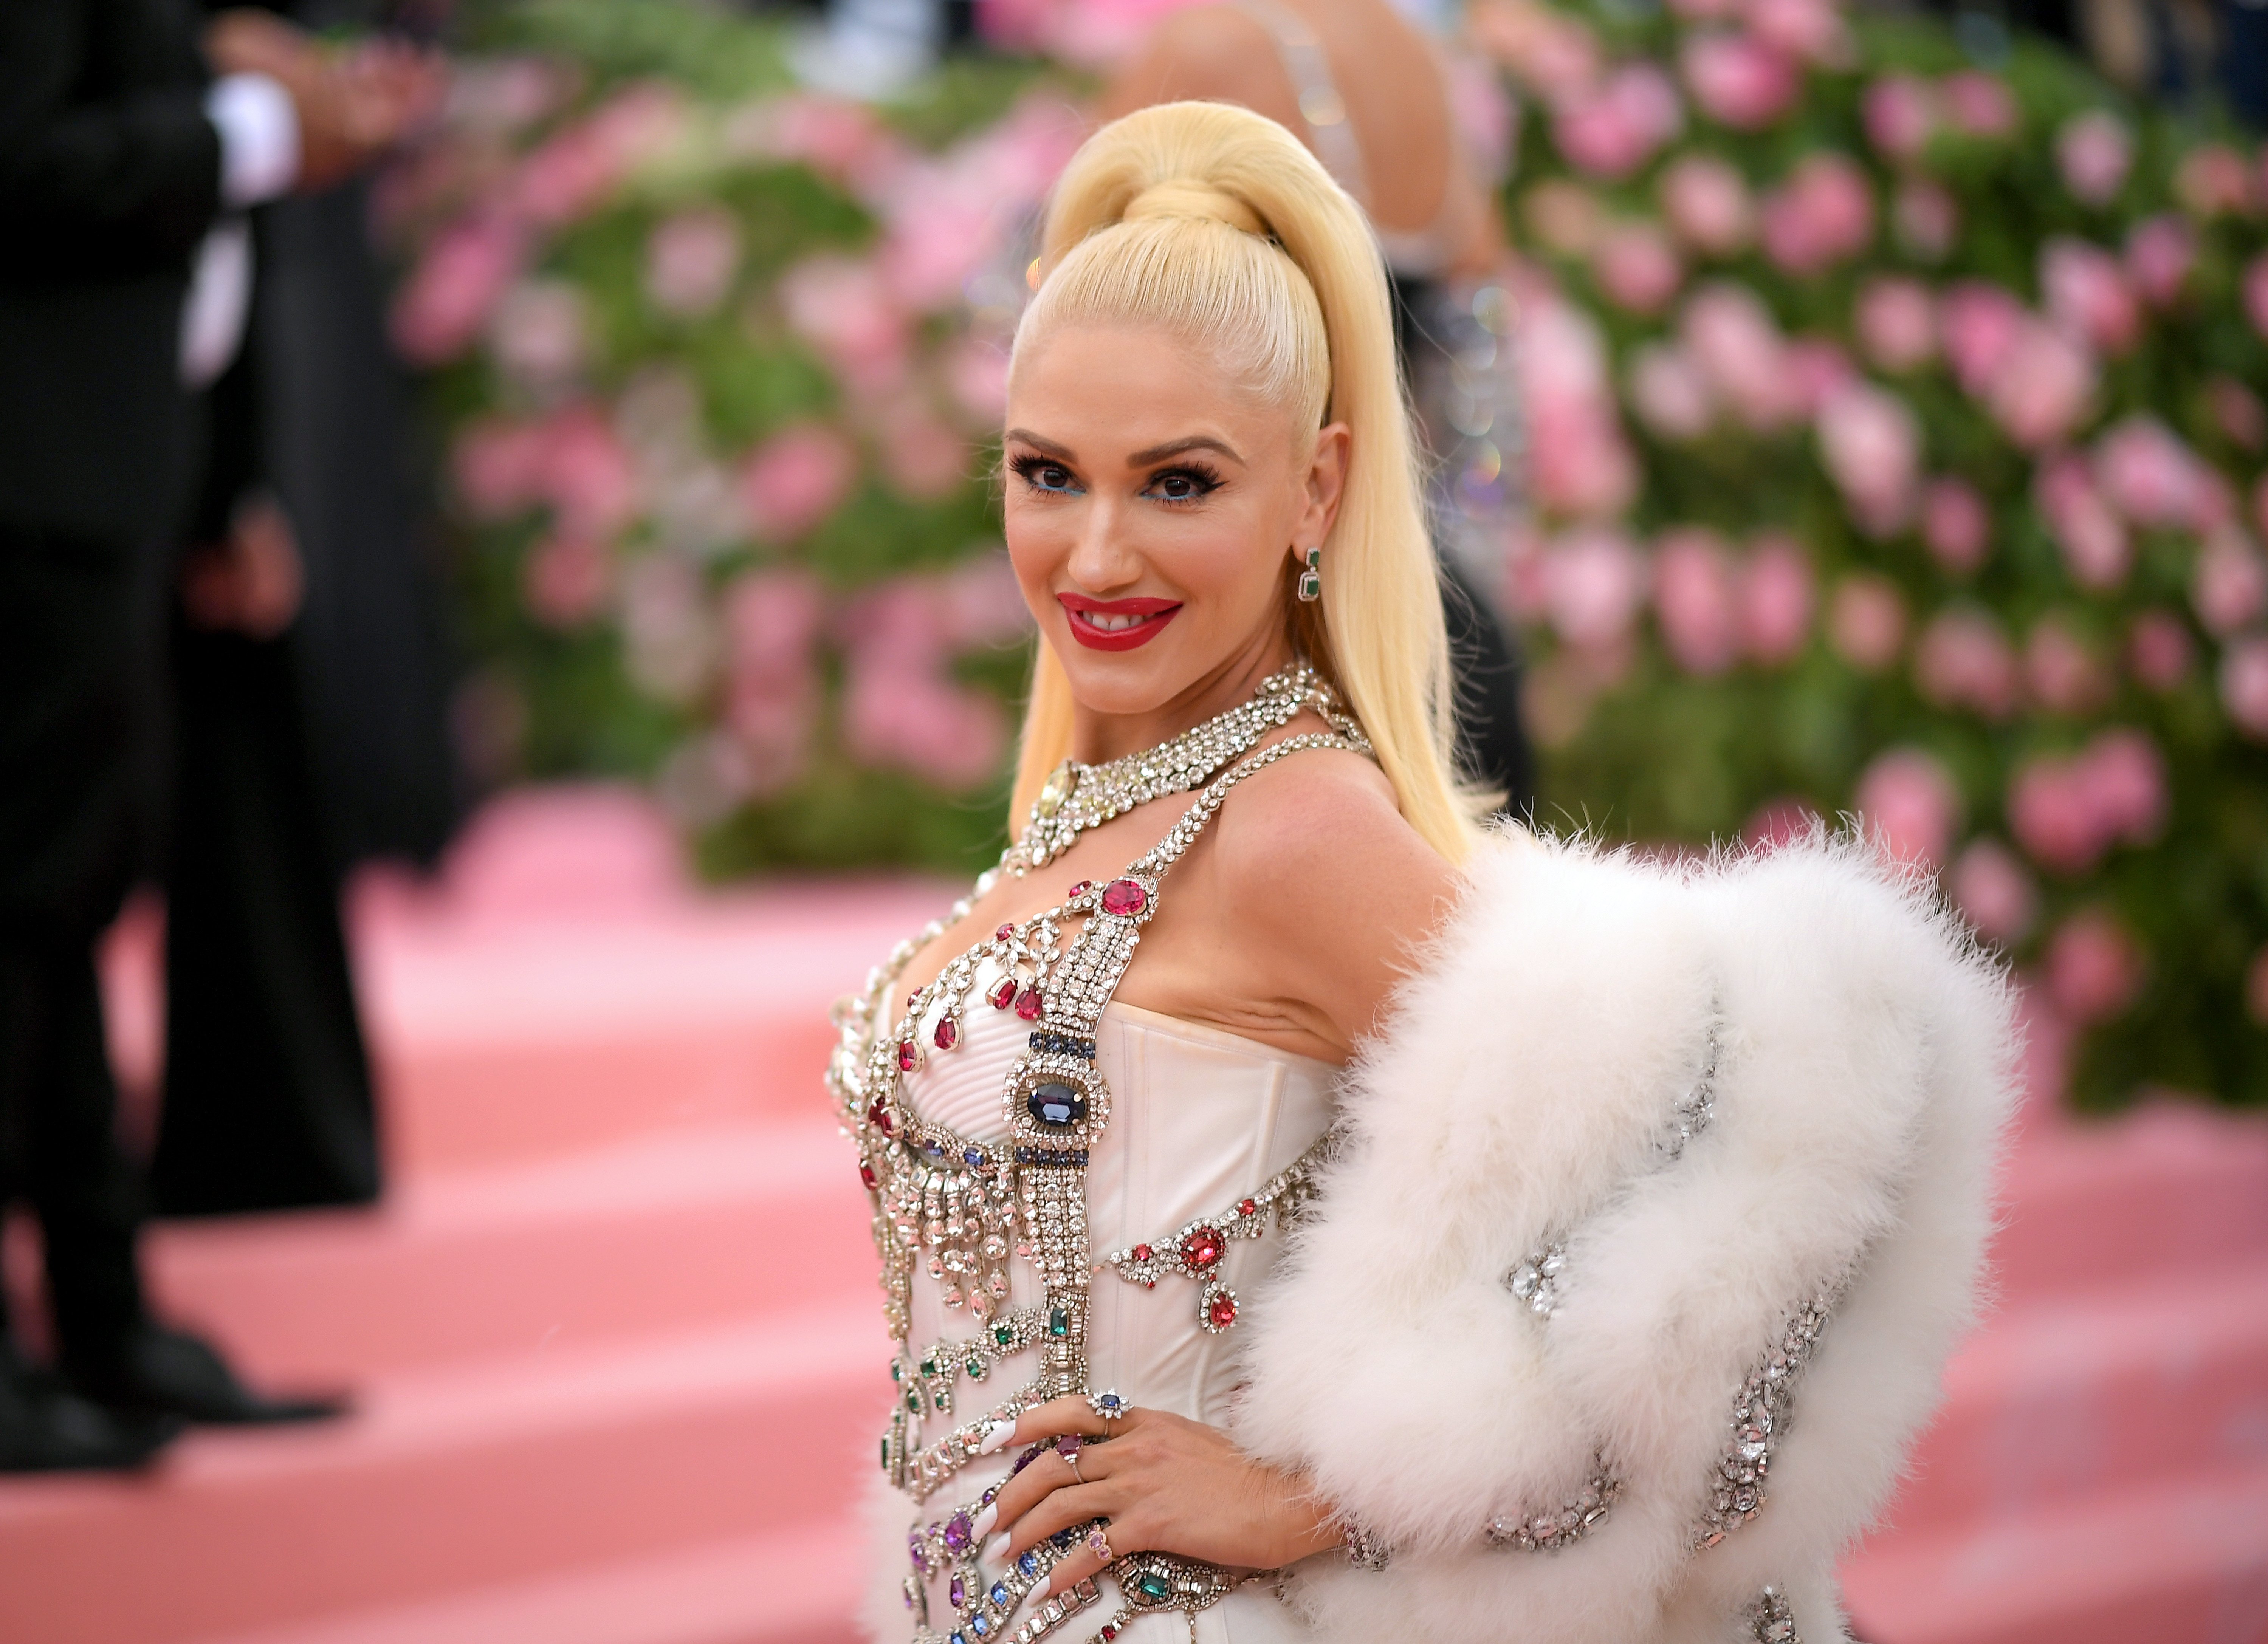 Gwen Stefani attends the Met Gala in New York City on May 6, 2019 | Photo: Getty Images